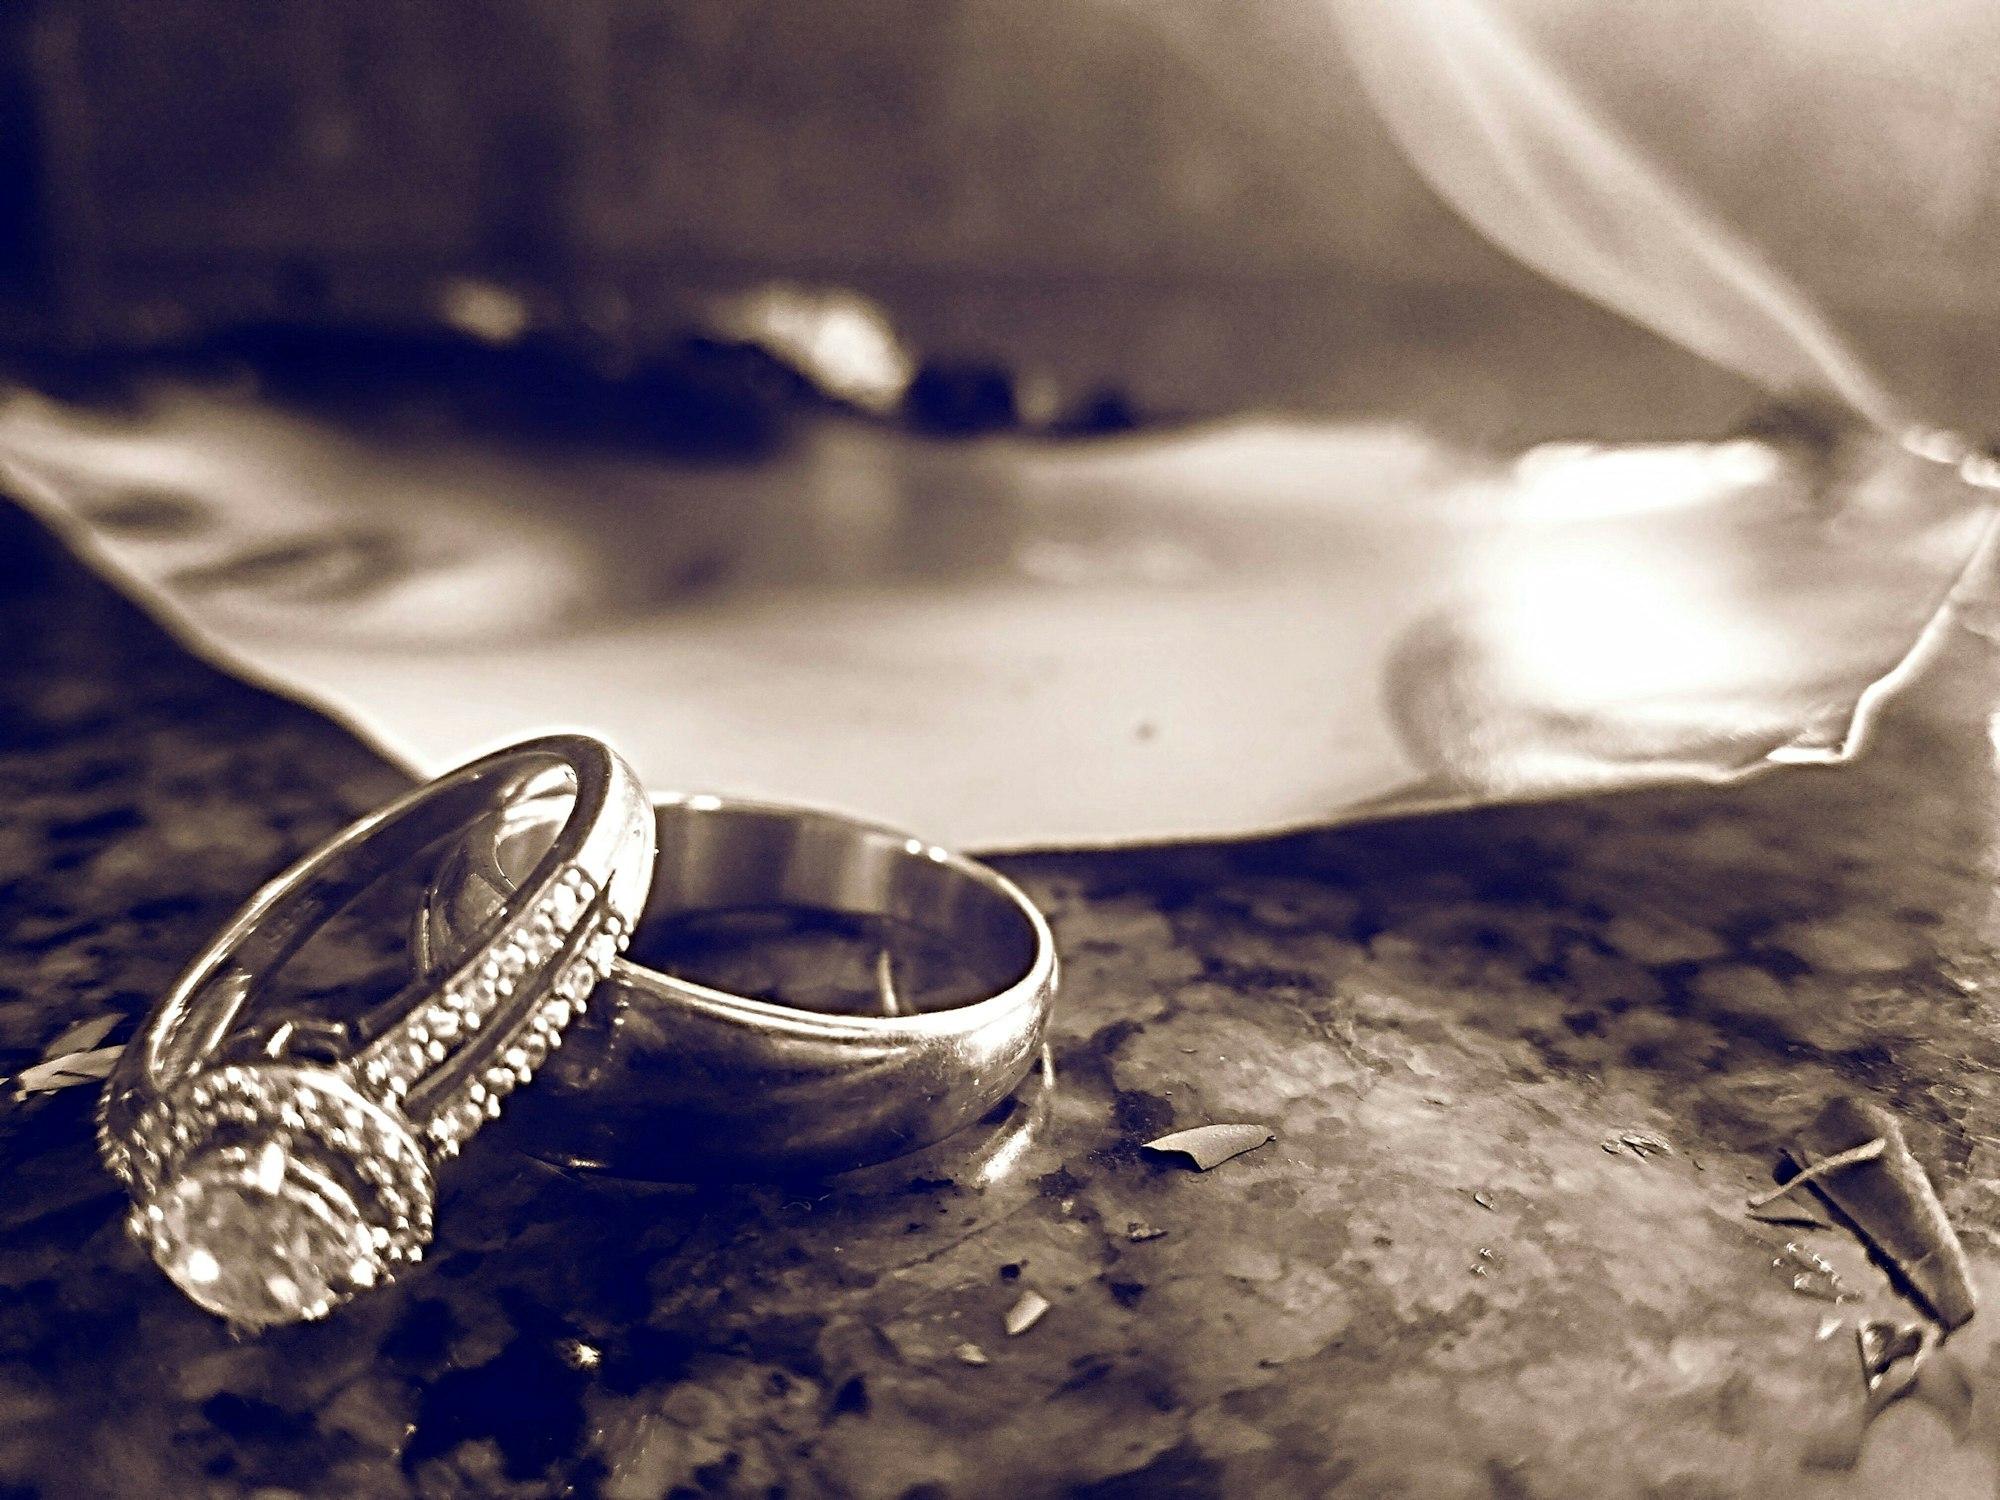 Monochromatic image of torn photograph burning on countertop with wedding rings next to it.